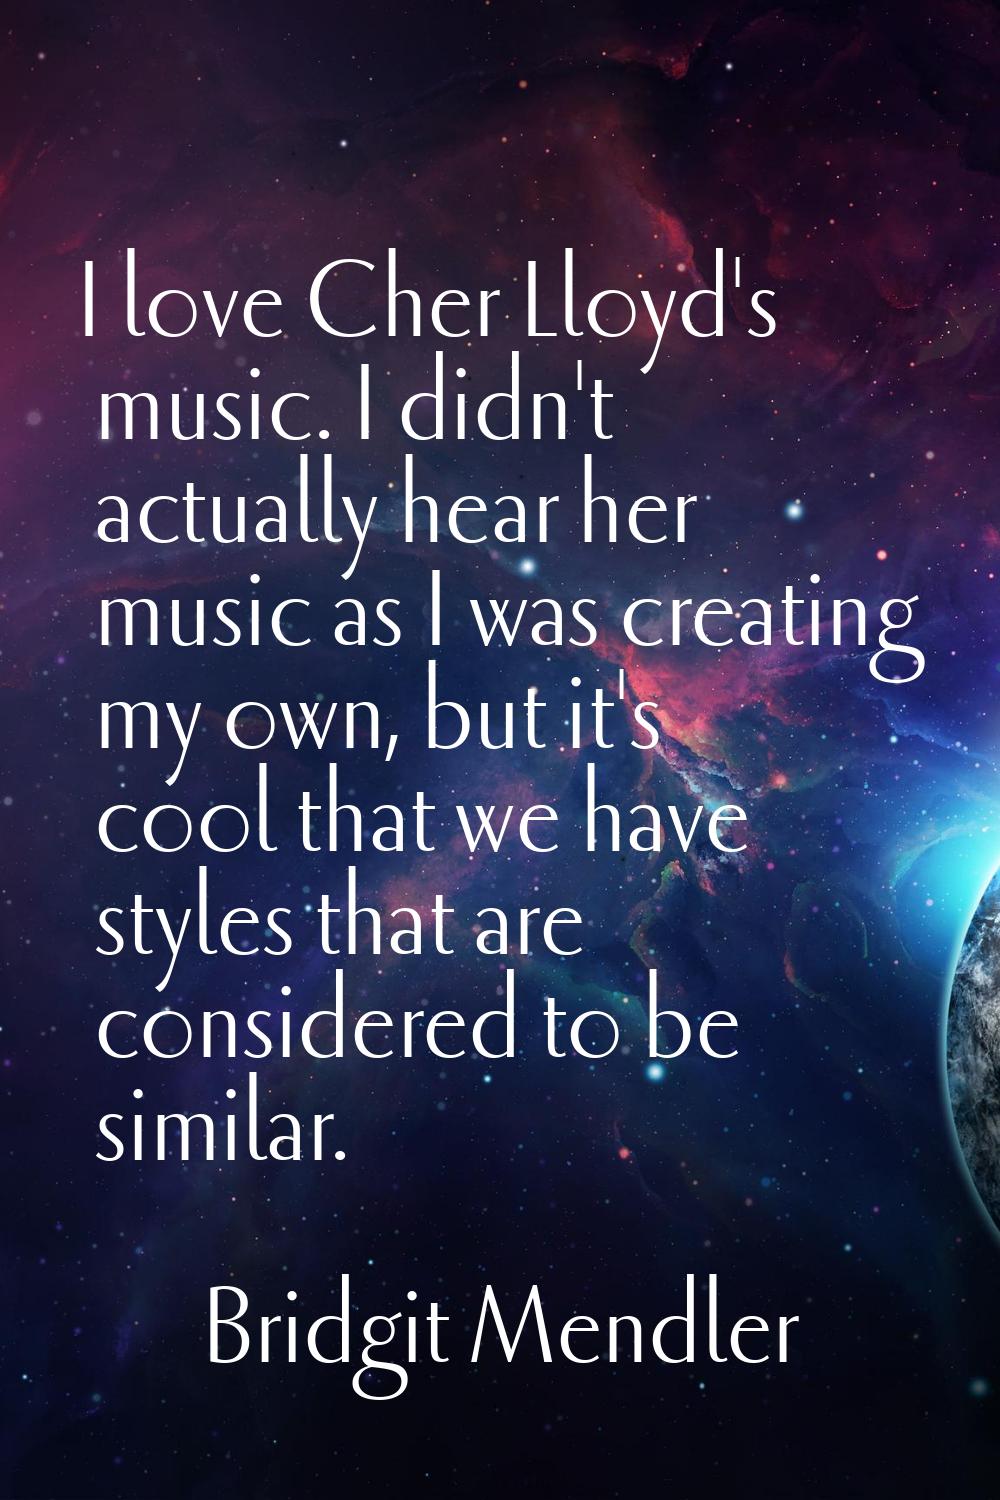 I love Cher Lloyd's music. I didn't actually hear her music as I was creating my own, but it's cool